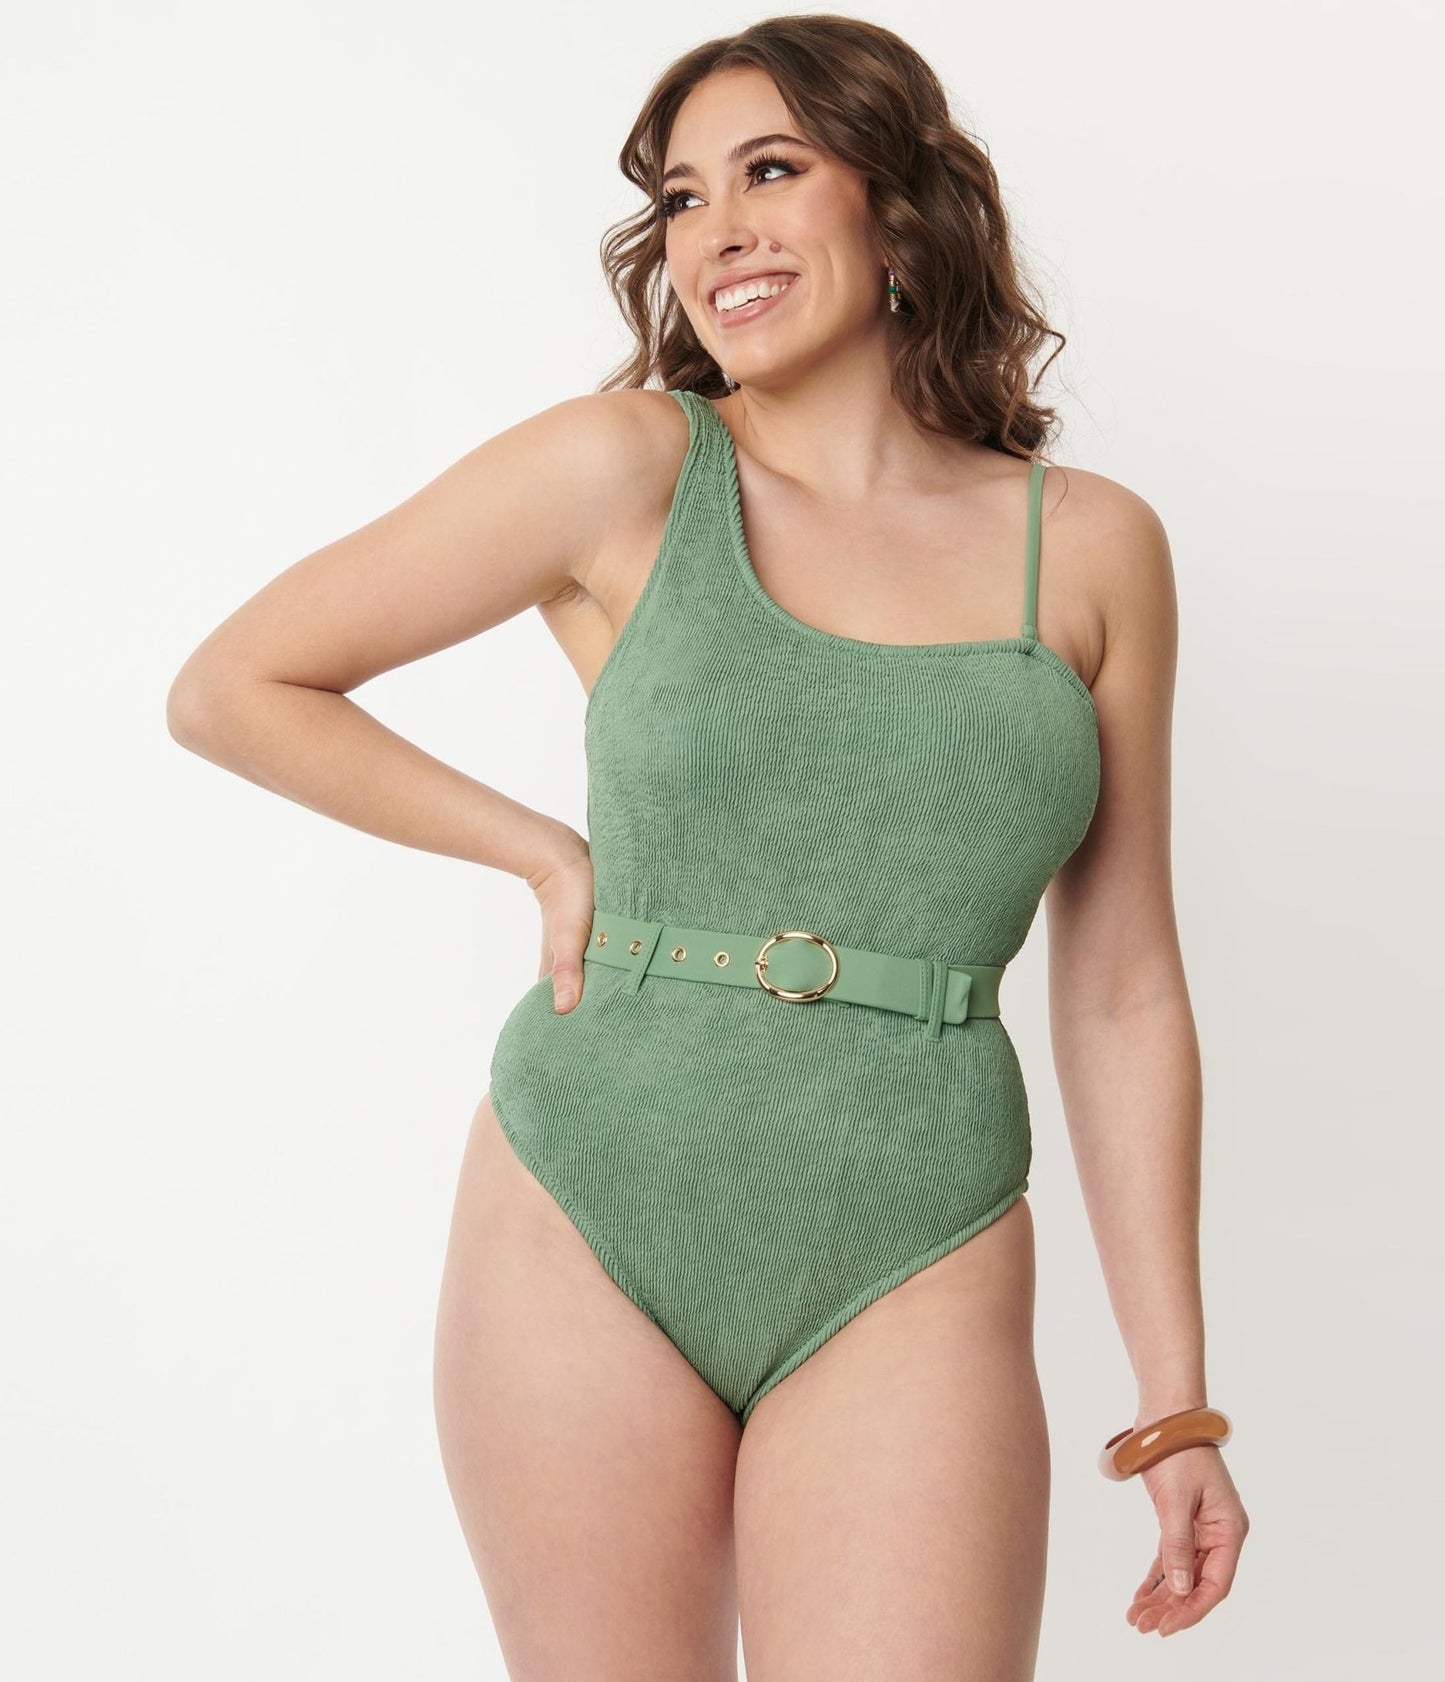 Green Belted One Piece Swimsuit - Unique Vintage - Womens, SWIM, 1 PC